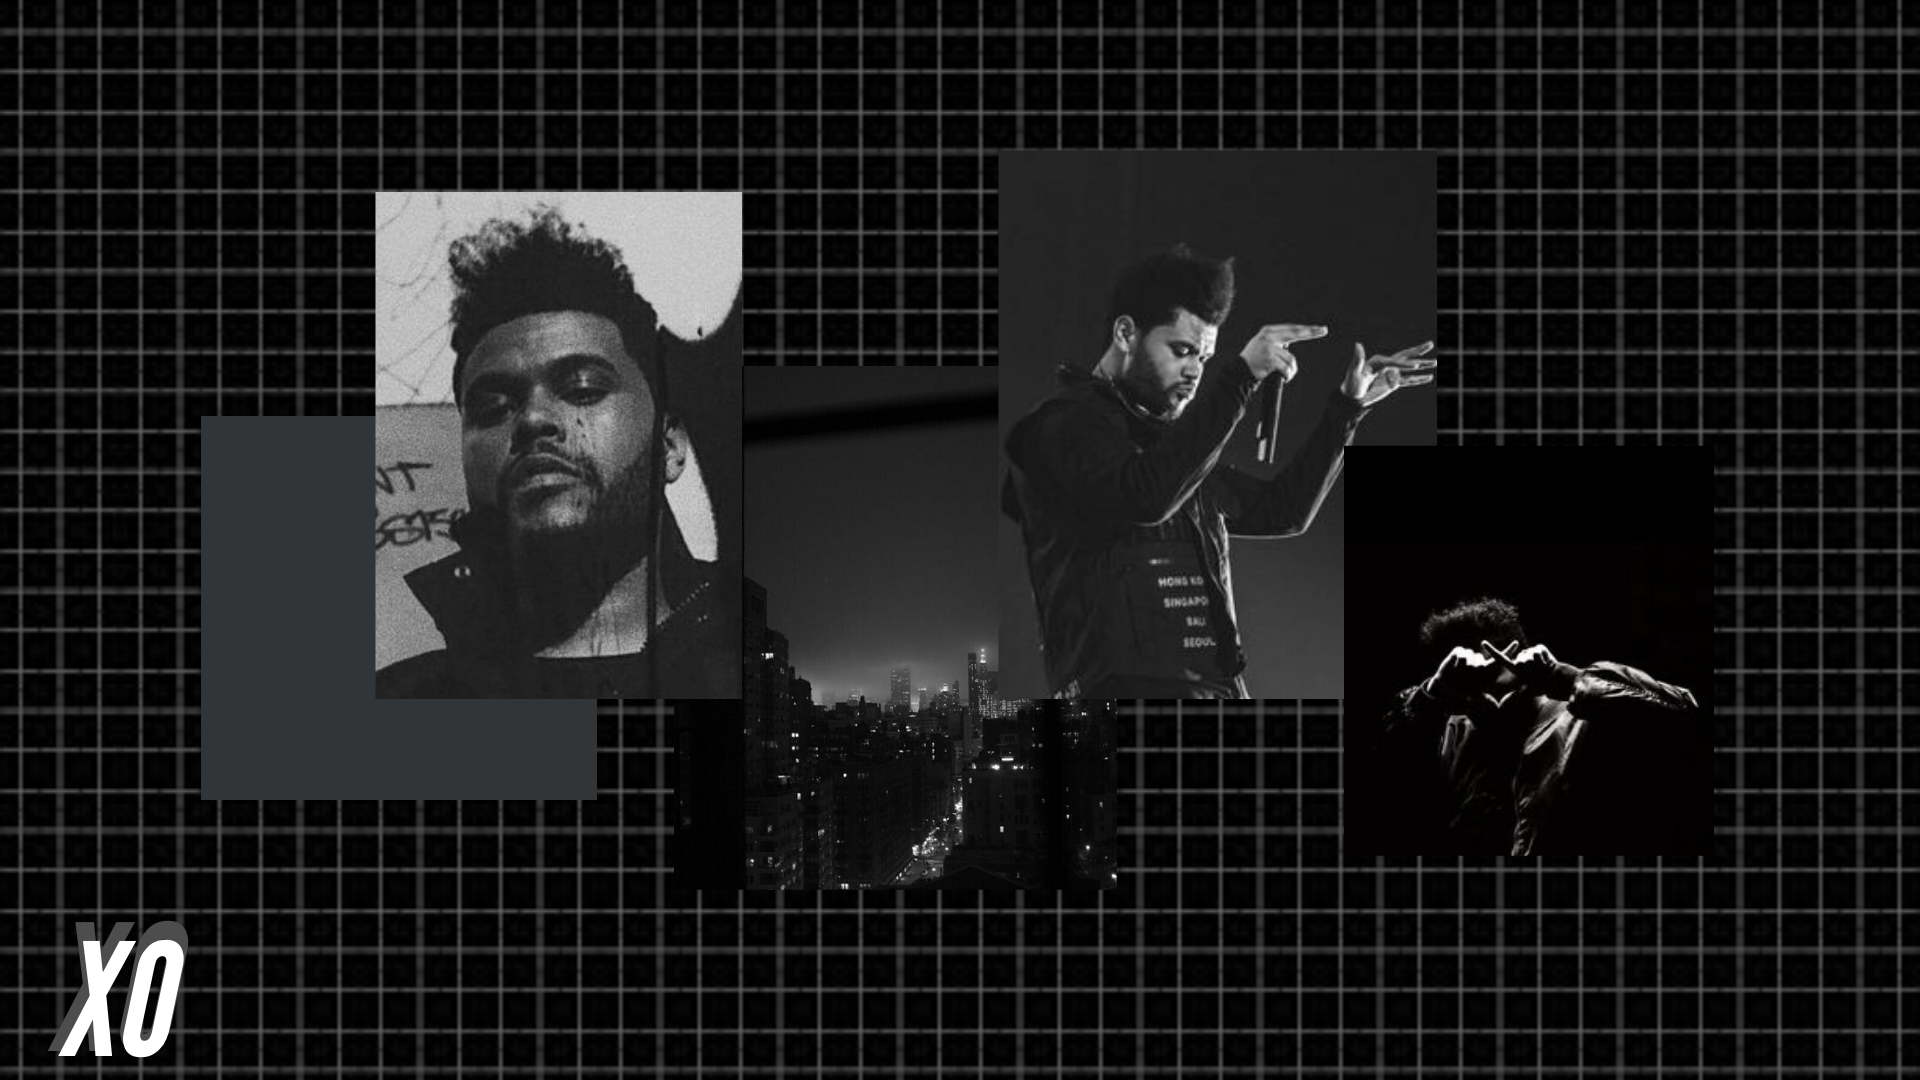 HALCYON on Twitter The The Weeknd Aesthetic aesthetic wallpaper  collage ａｅｓｔｈｅｔｉｃ aestheticedits aesthetics aestheticphotos  aestheticwallpapers TheWeeknd AfterHours httpstcosZYGX3dkF4   Twitter